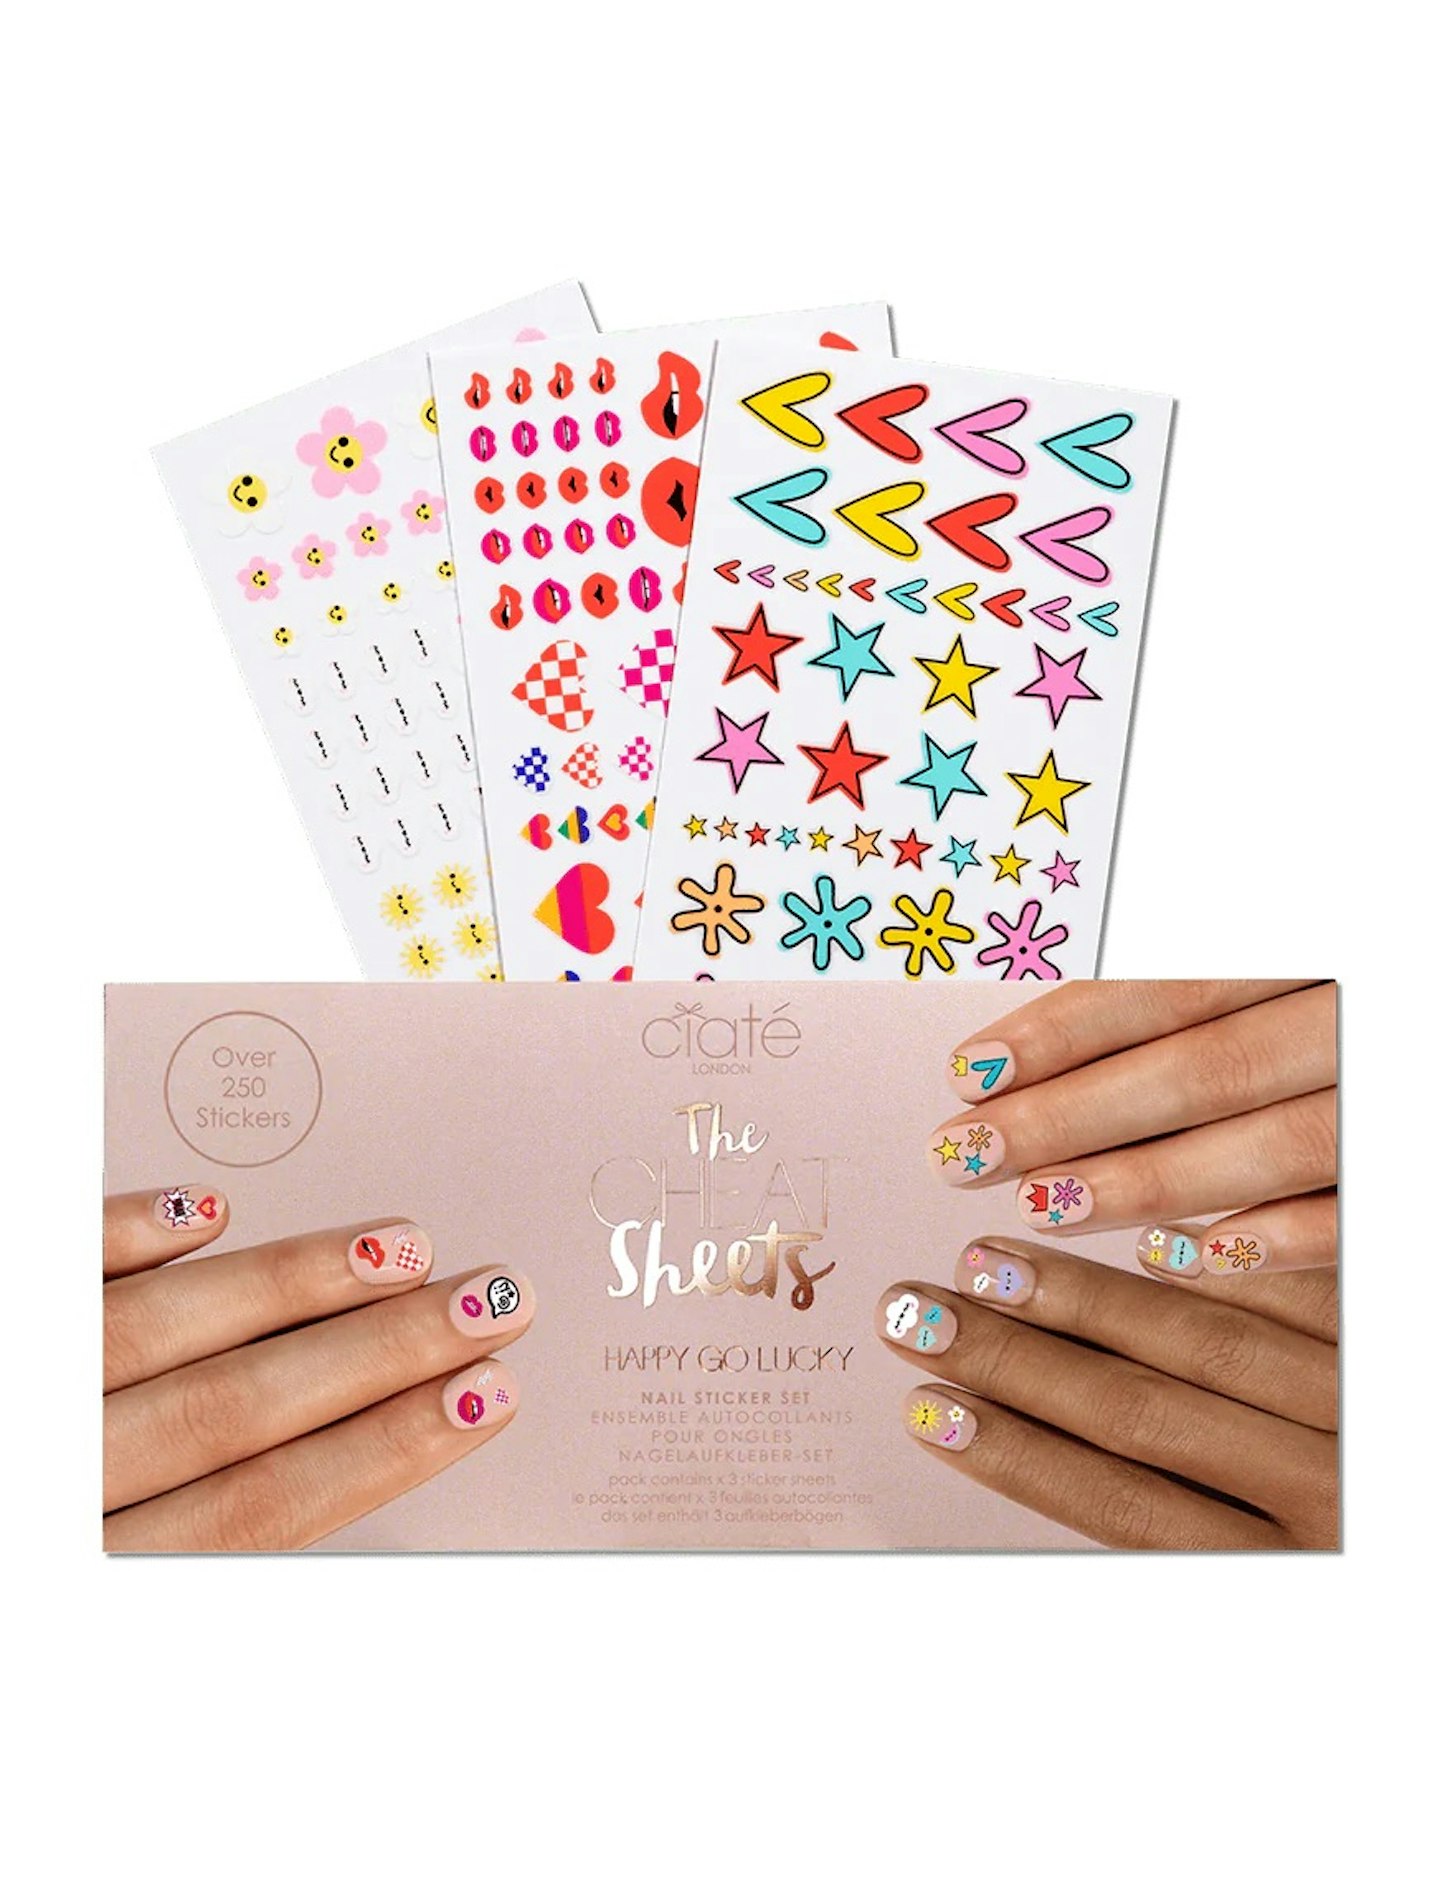 Ciaté The Cheat Sheets Happy Go Lucky Nail Stickers